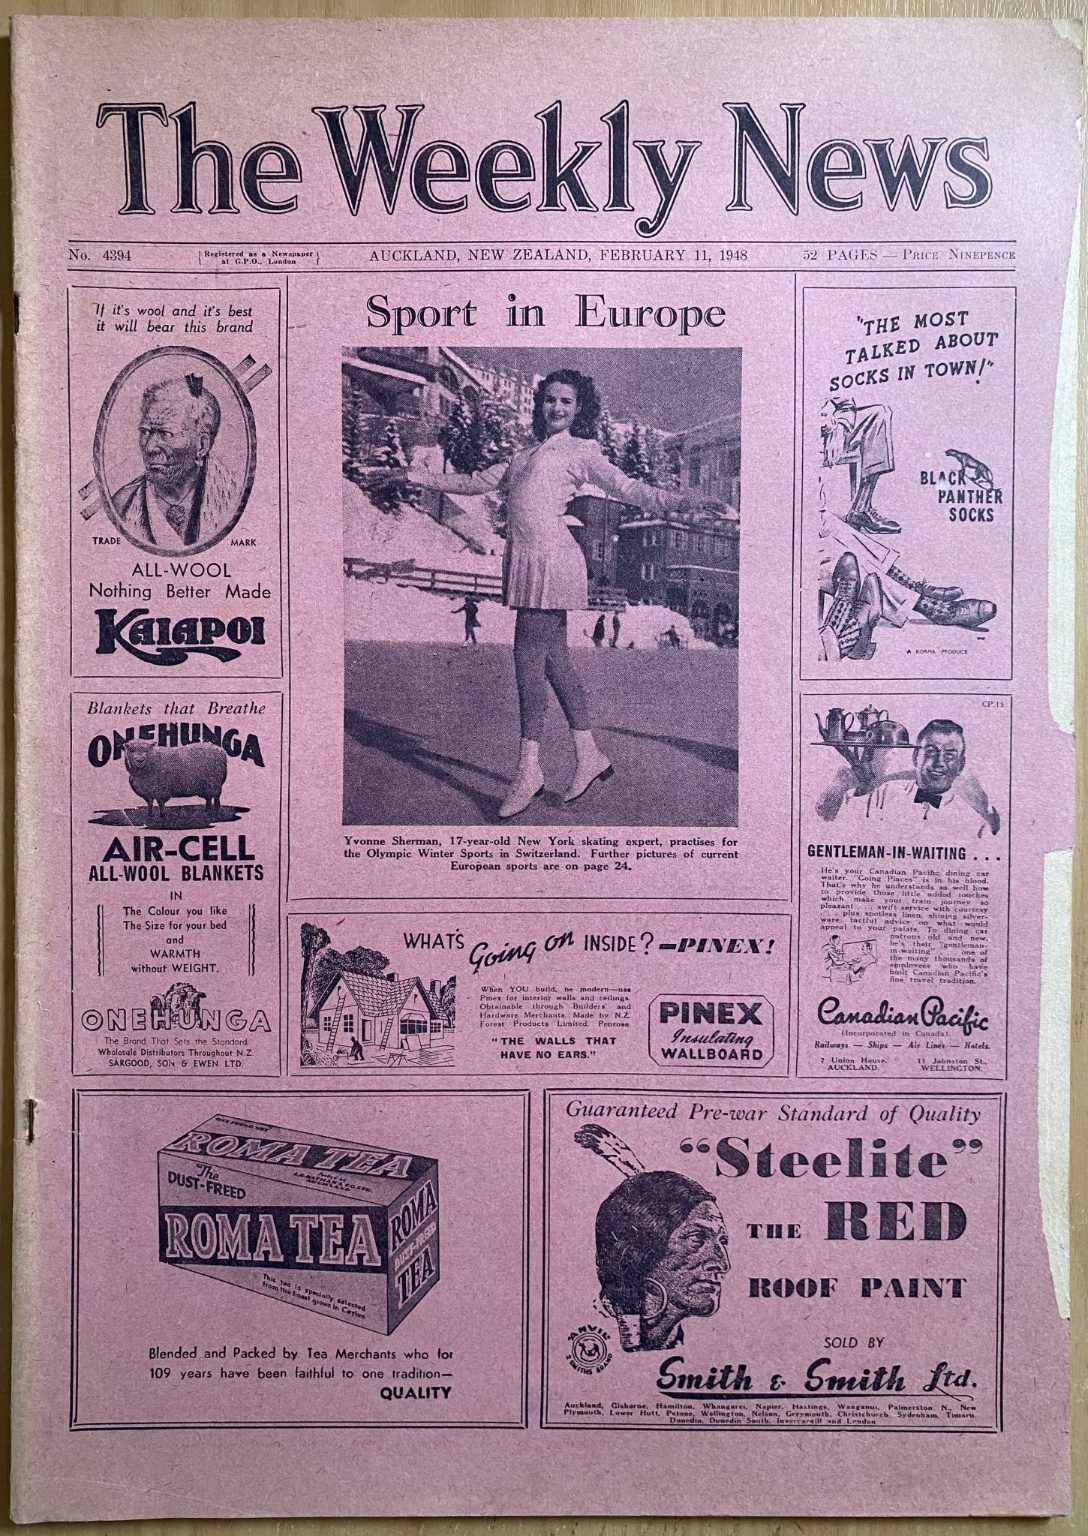 OLD NEWSPAPER: The Weekly News - No. 4394, 11 February 1948